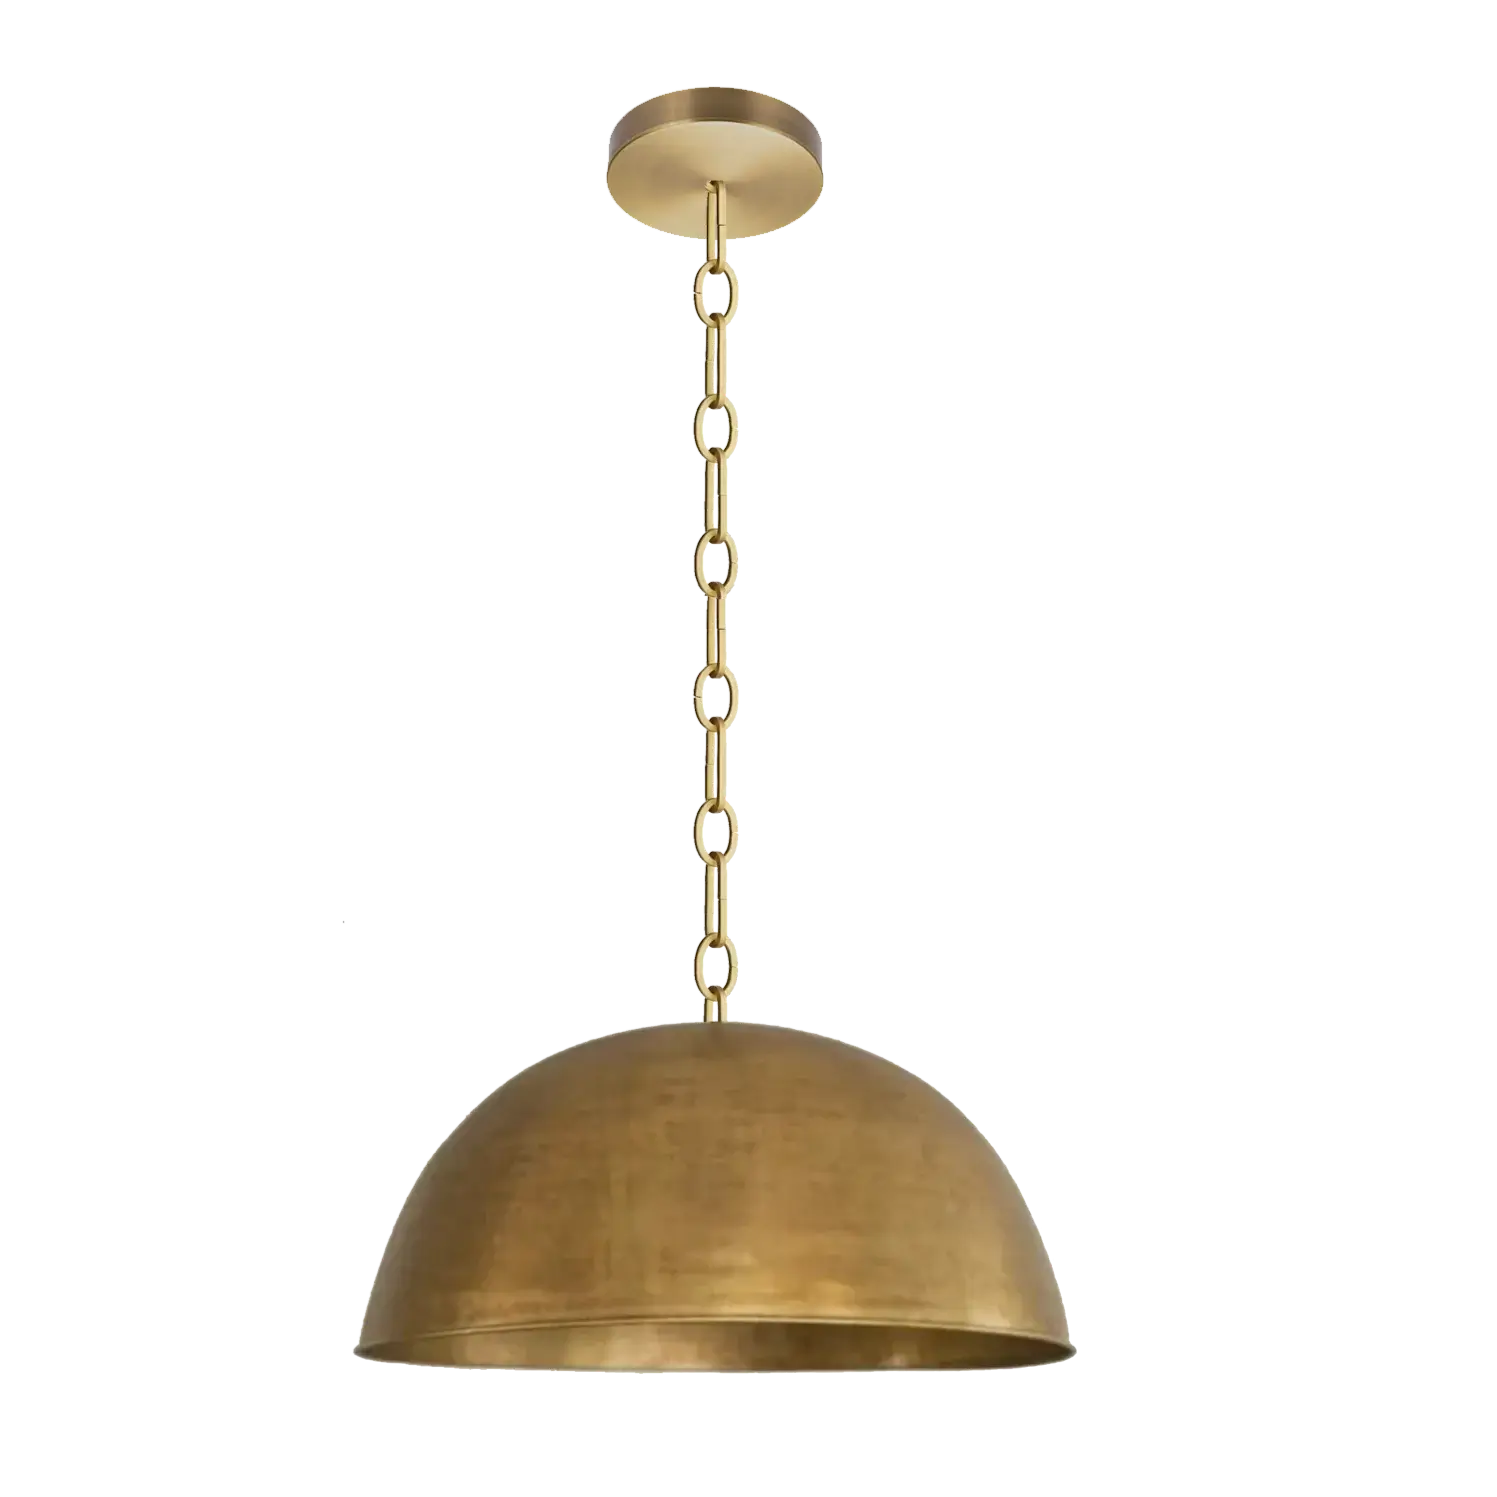 Dounia home Pendant light in Antique brass made of Metal, Model: Quba lagre Dome